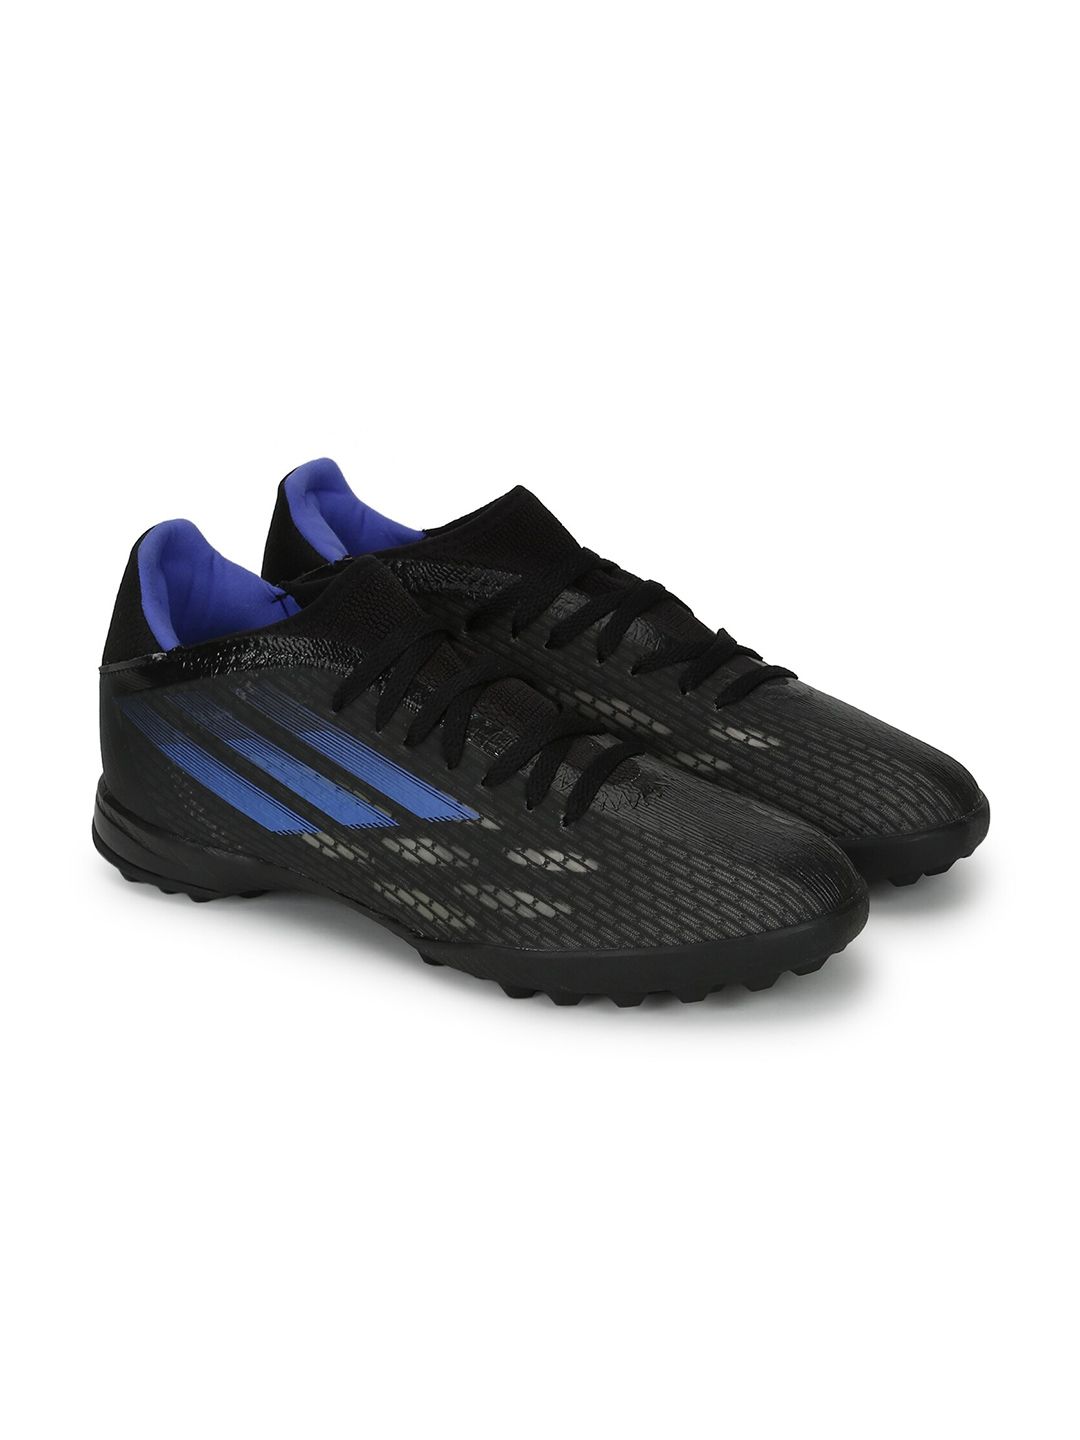 ADIDAS Unisex Black Sports Shoes Price in India